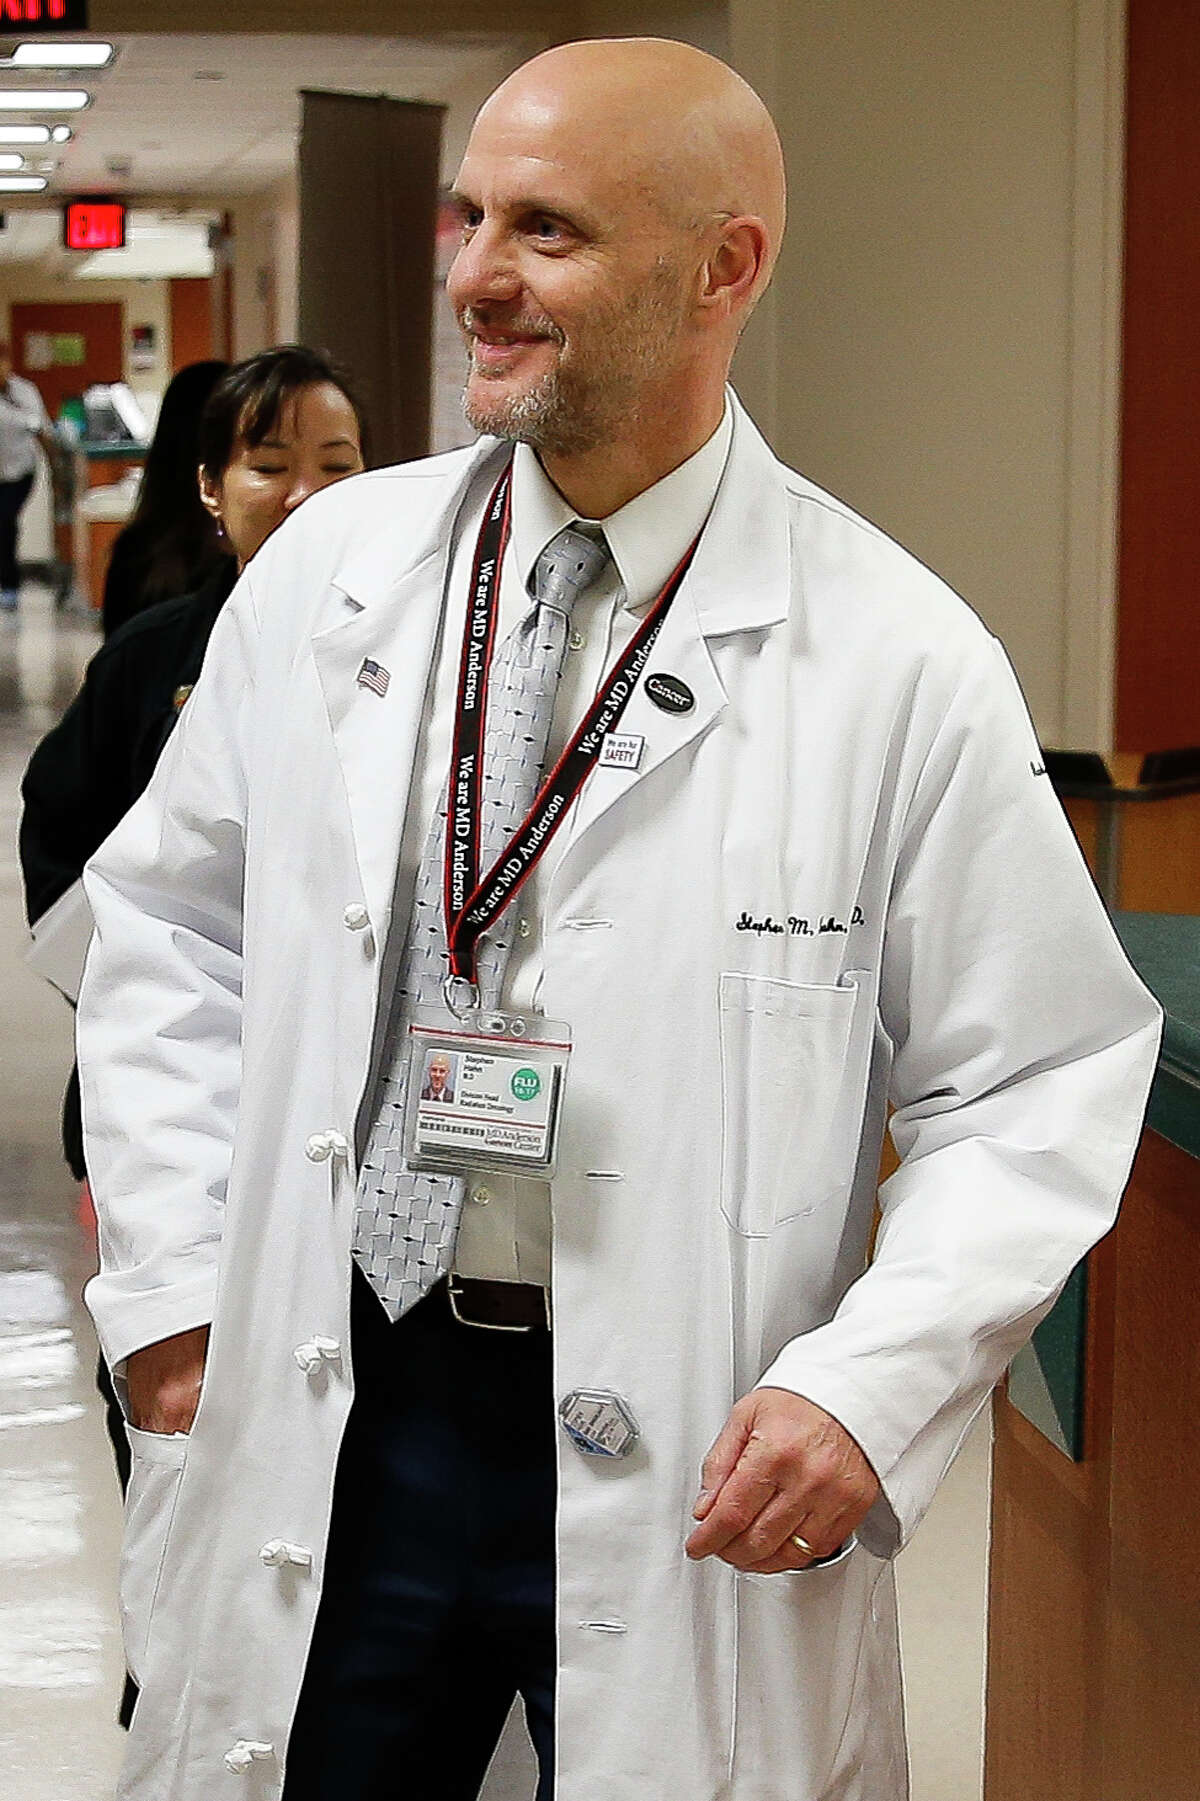 MD Anderson's new COO Dr. Stephen Hahn meets with nurses from the orthopedic and genitourinary floor as he makes introductory rounds with department heads Thursday, March 2, 2017 in Houston. ( Michael Ciaglo / Houston Chronicle )